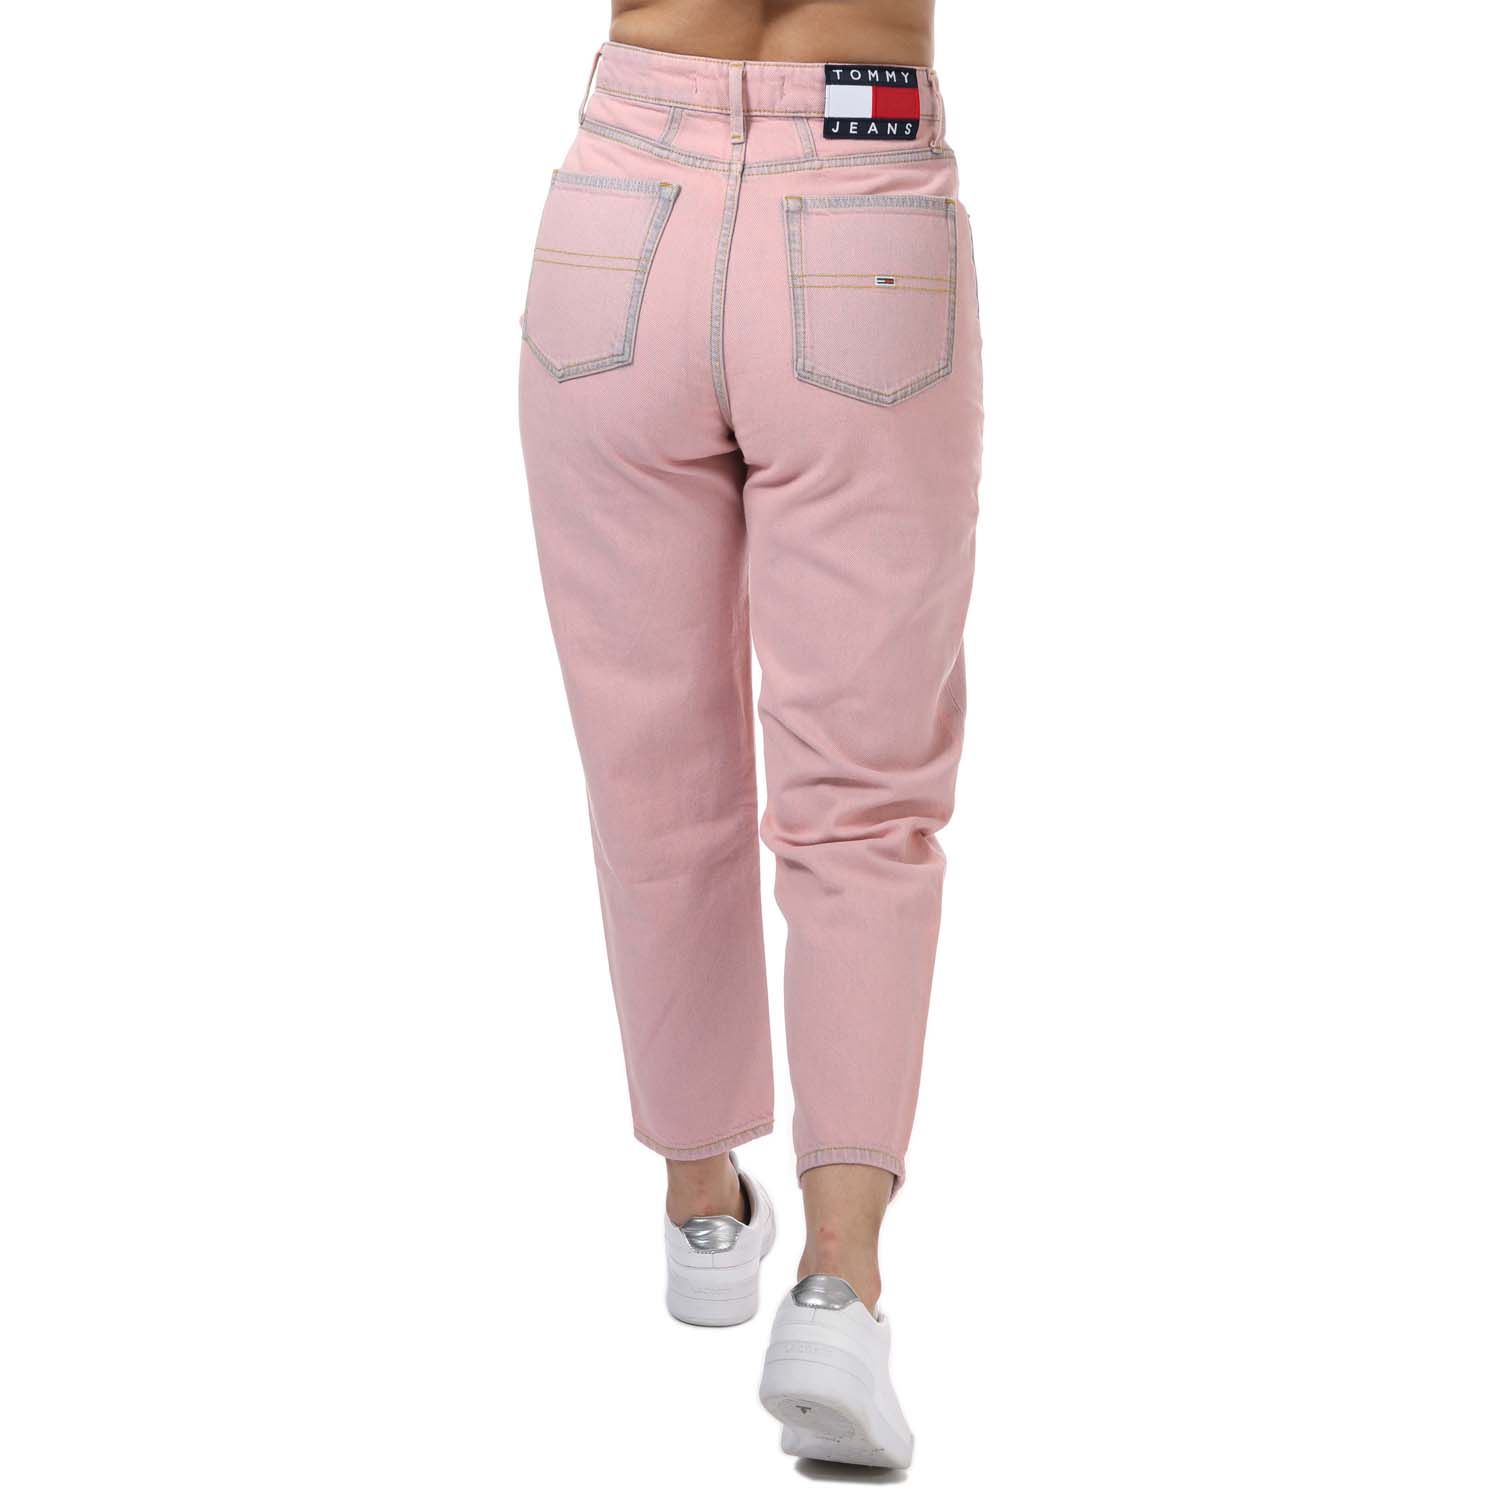 The Ultra Tapered Rise Tommy Womens High Get Mom Hilfiger Jeans Pink - Label